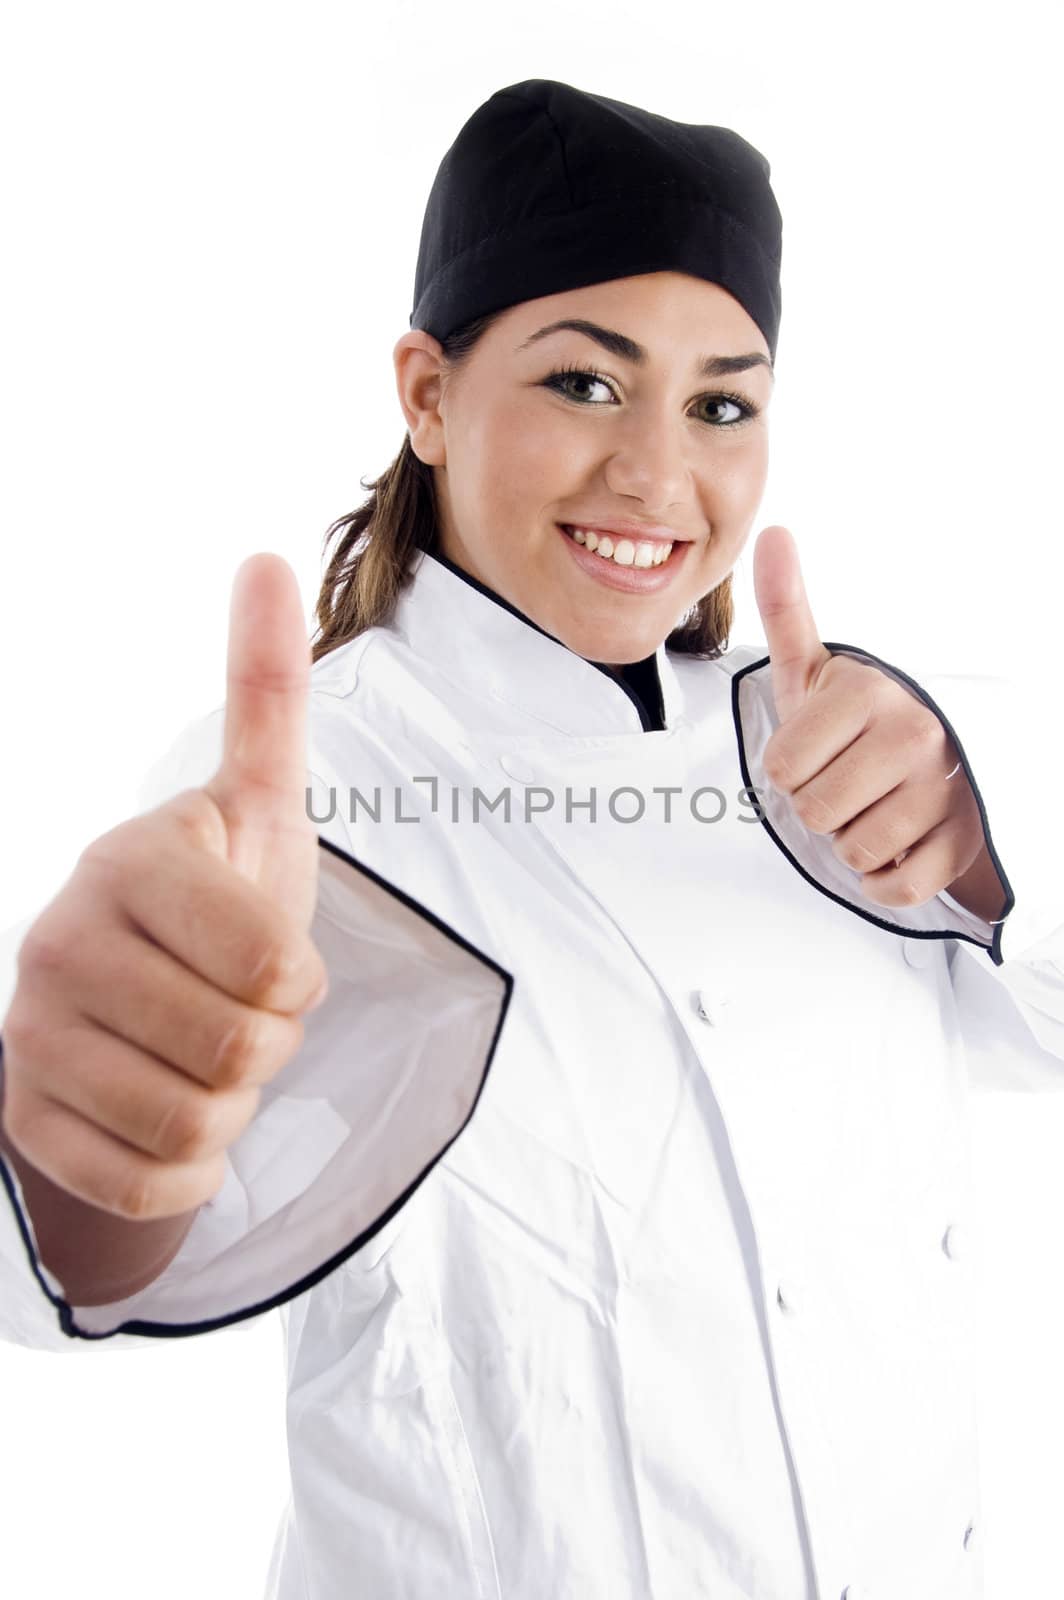 successful female chef showing thumbs up by imagerymajestic